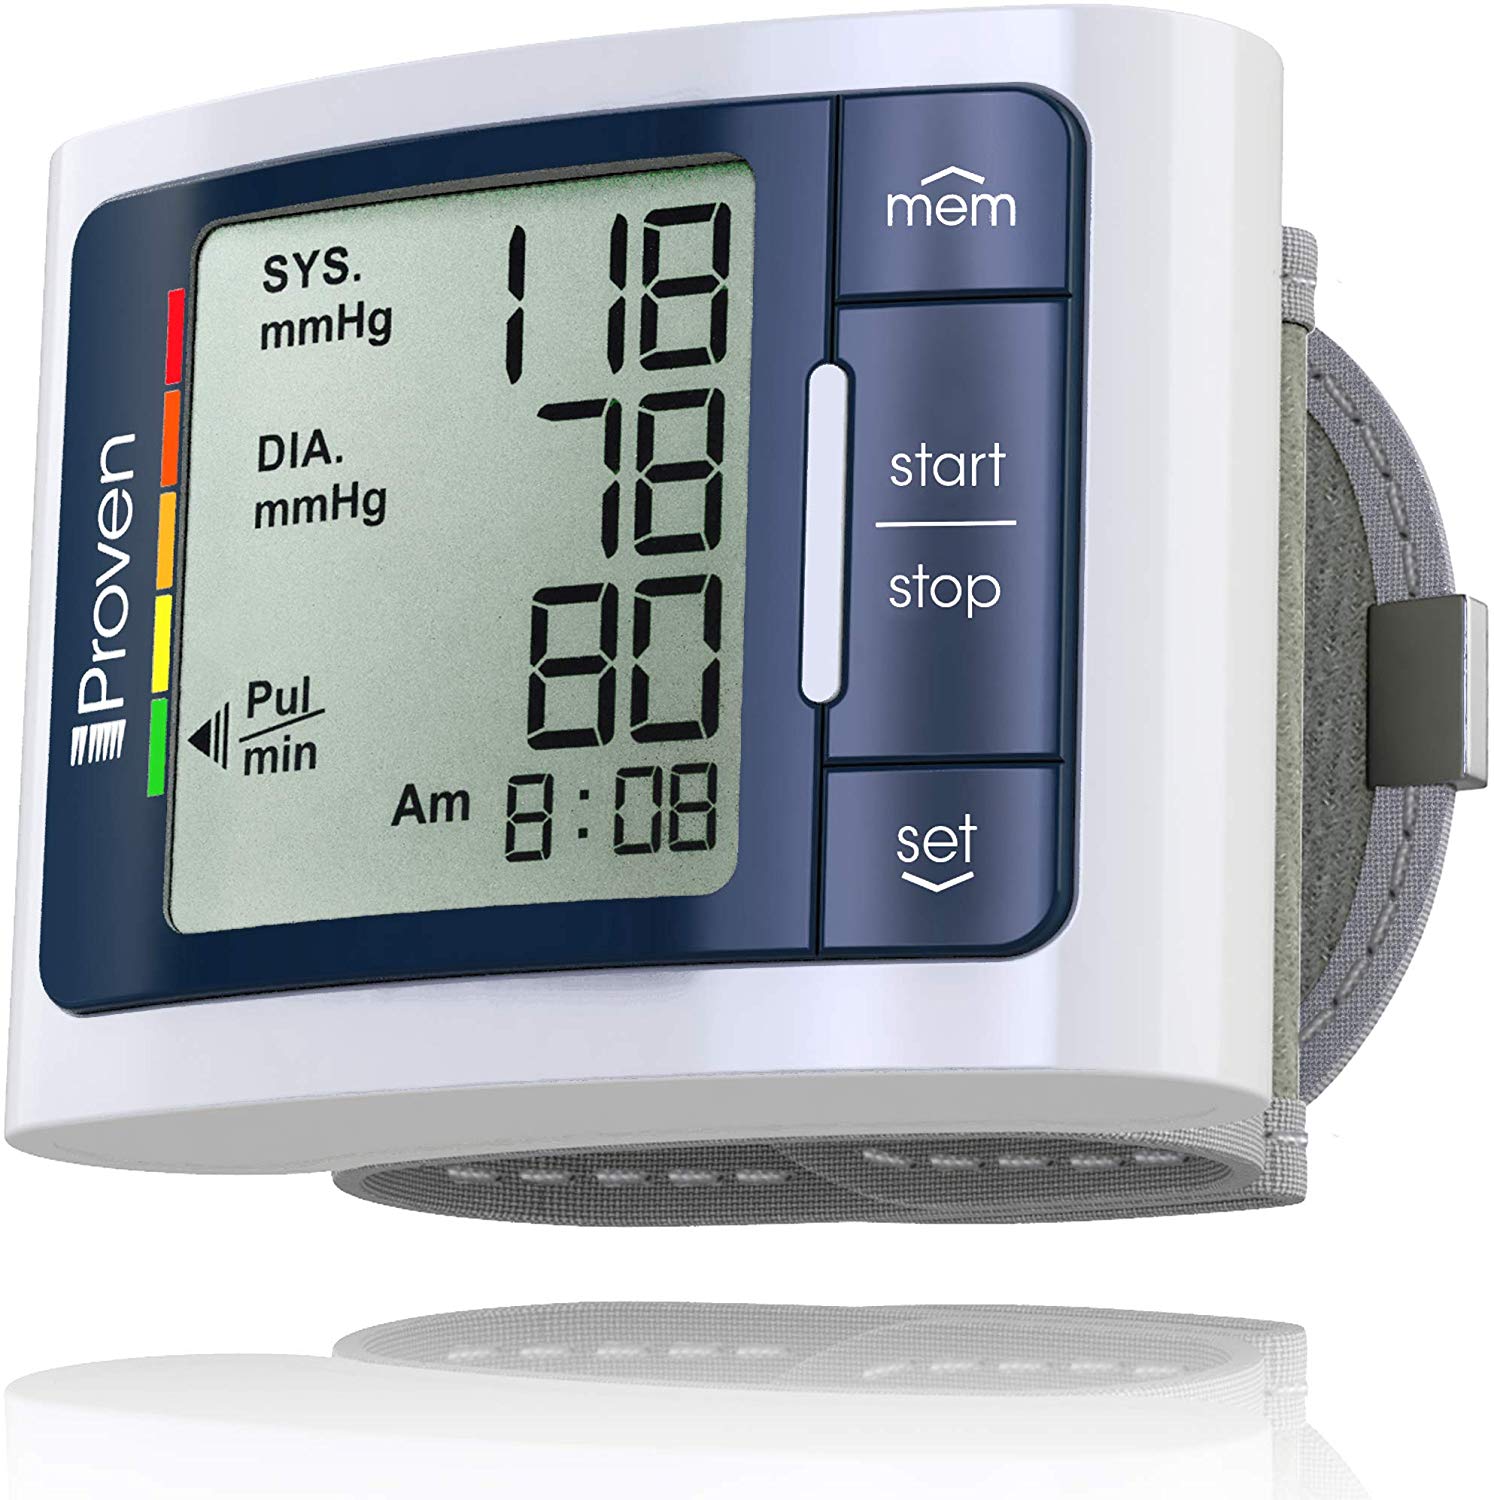 iProvèn Wrist Blood Pressure Monitor Watch - Digital Home Blood Pressure Meter - Manual Blood Pressure Cuff - Clinically Accurate & Fast Reading - BPM-337 by iProvèn, Grey